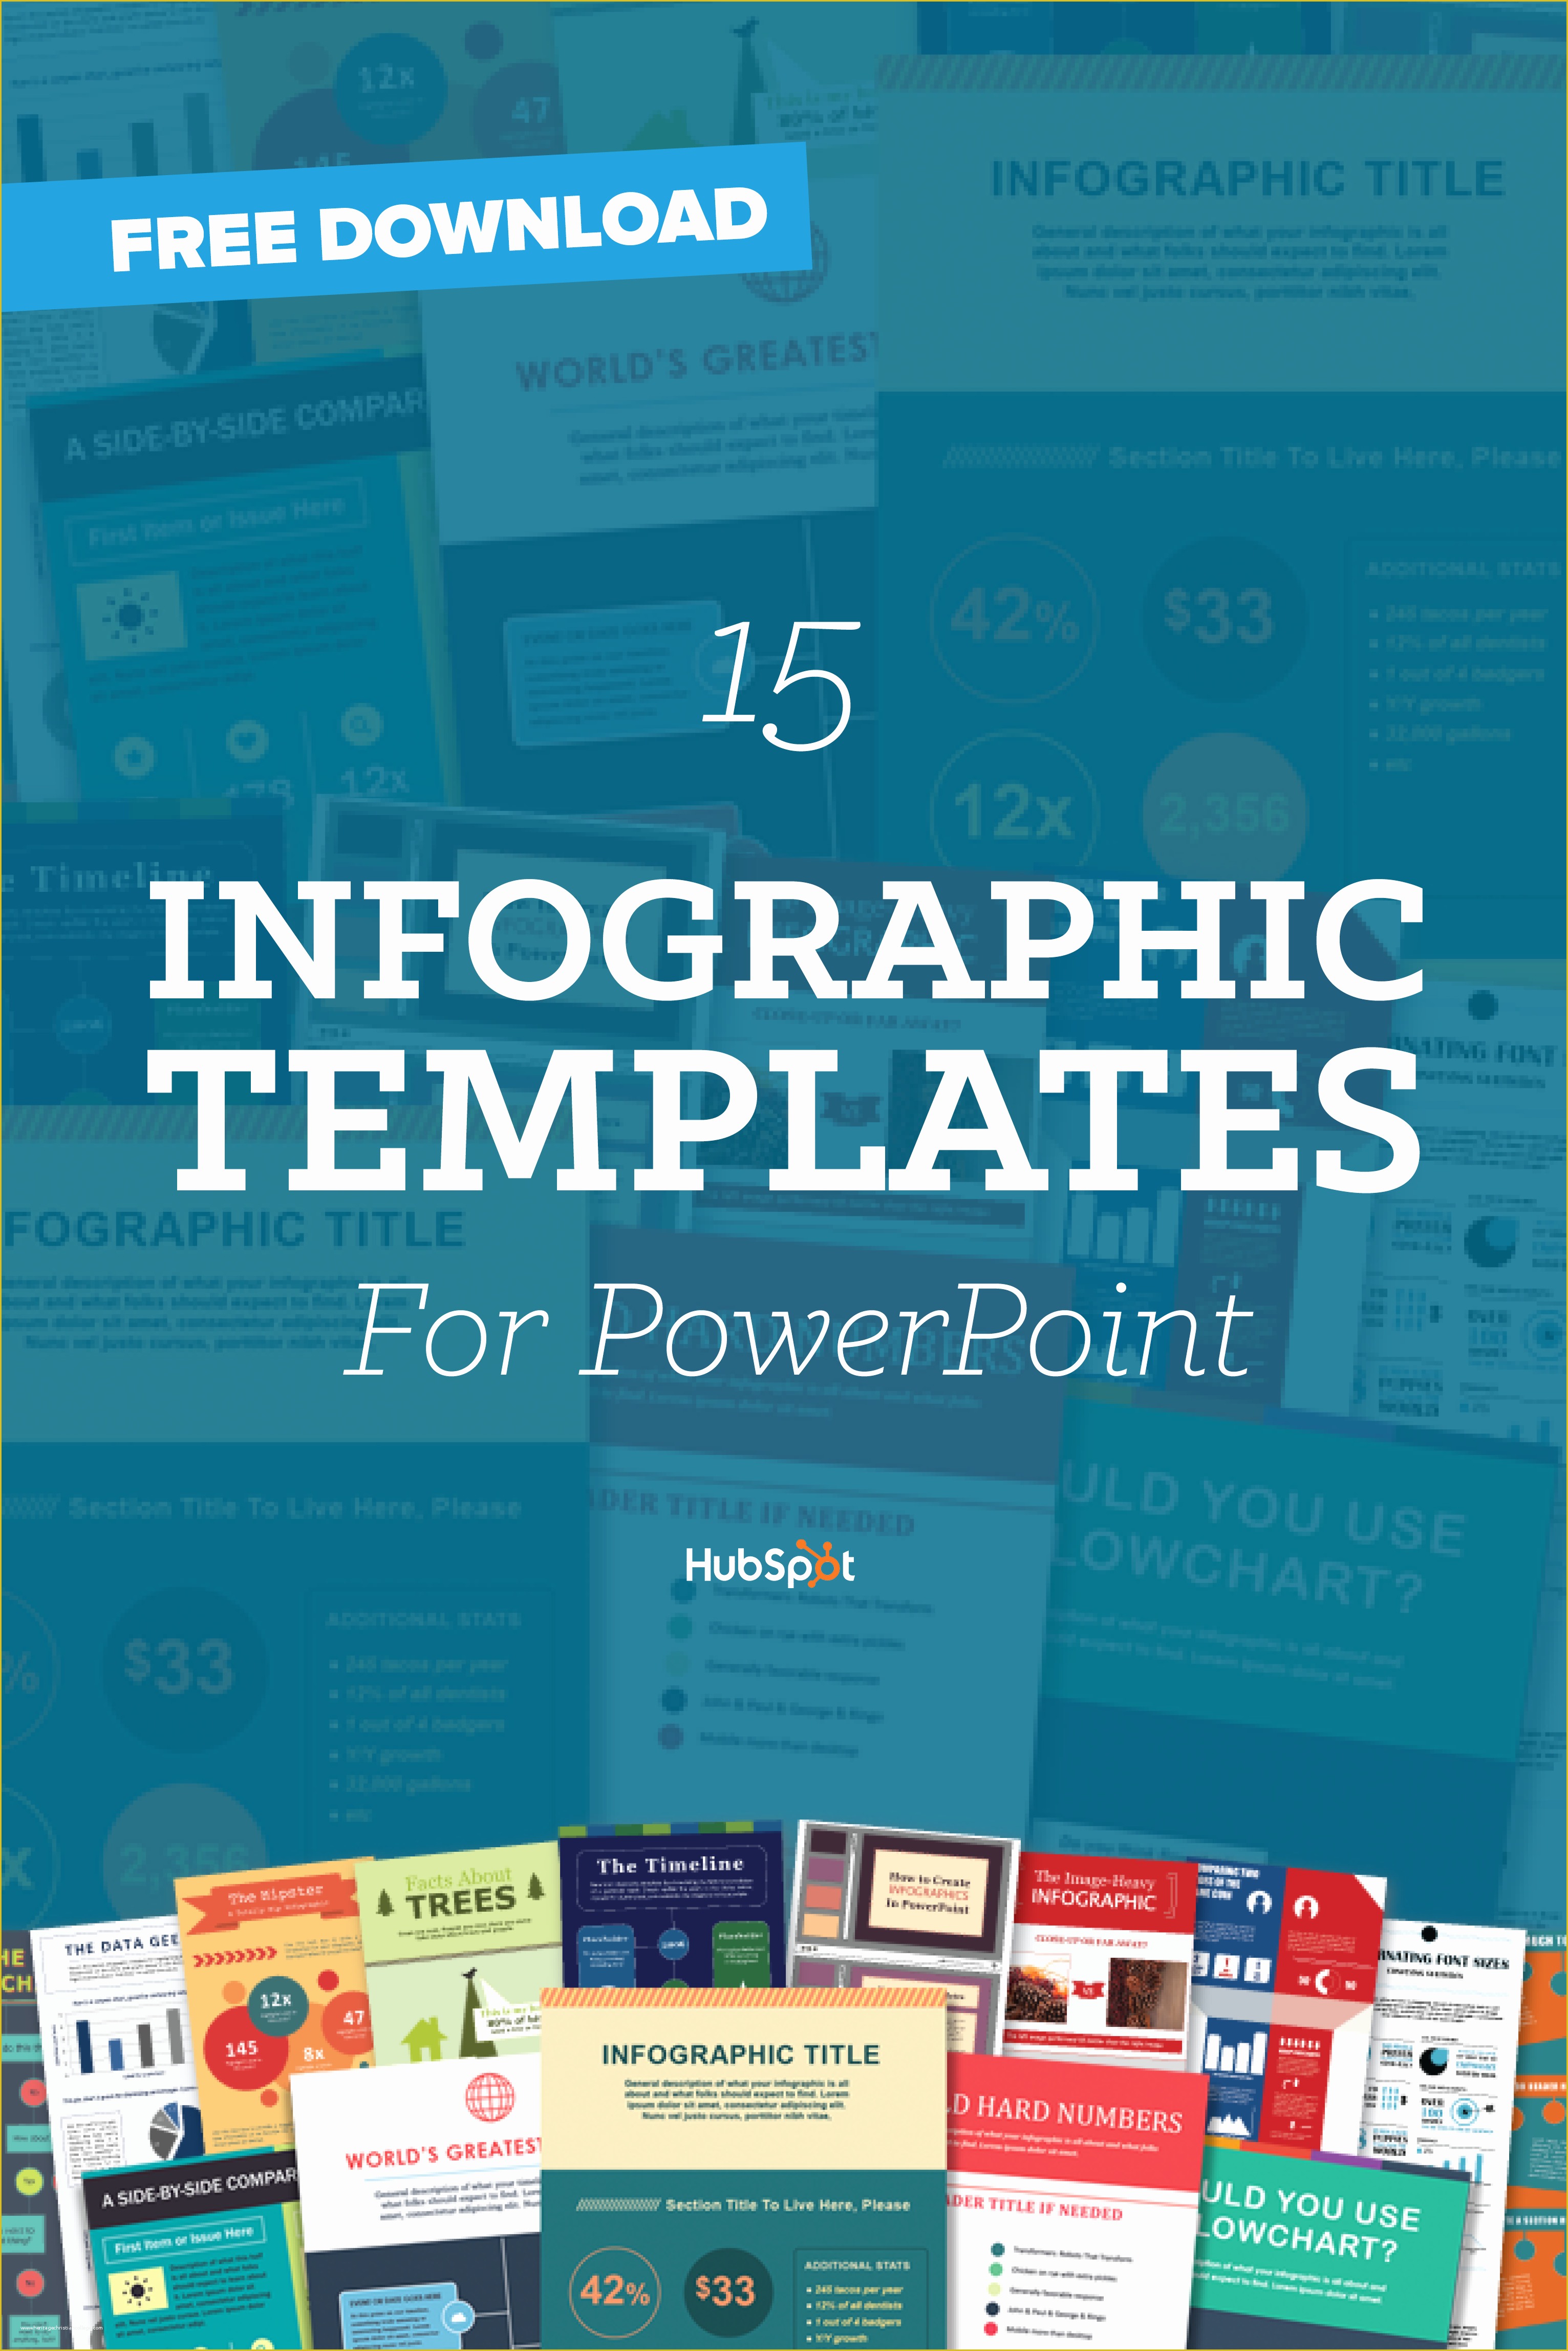 Infographic Template Free Download Of Snap Infographic Template Powerpoint Briskifo Photos On